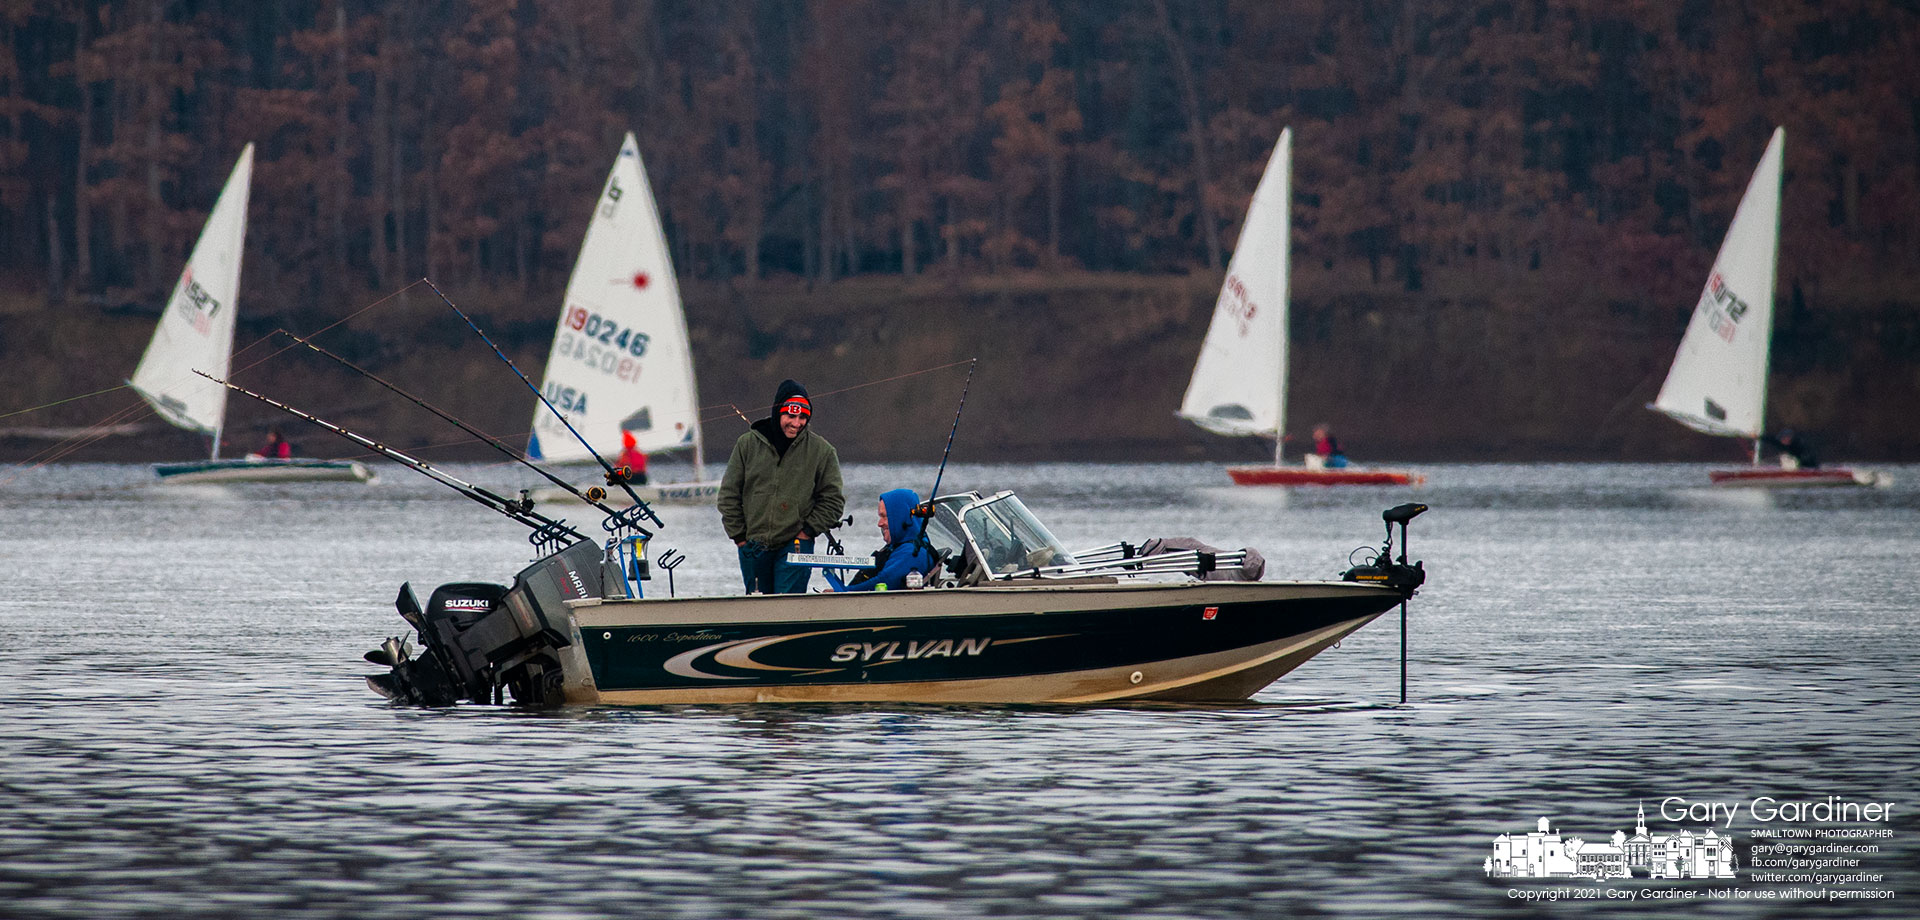 A pair of fishermen enjoy a laugh as Laser sailors from the Hoover Sailing Club share the calm waters of Hoover Reservoir on the final day of 2021. By Final Photo for Dec. 31, 2021.